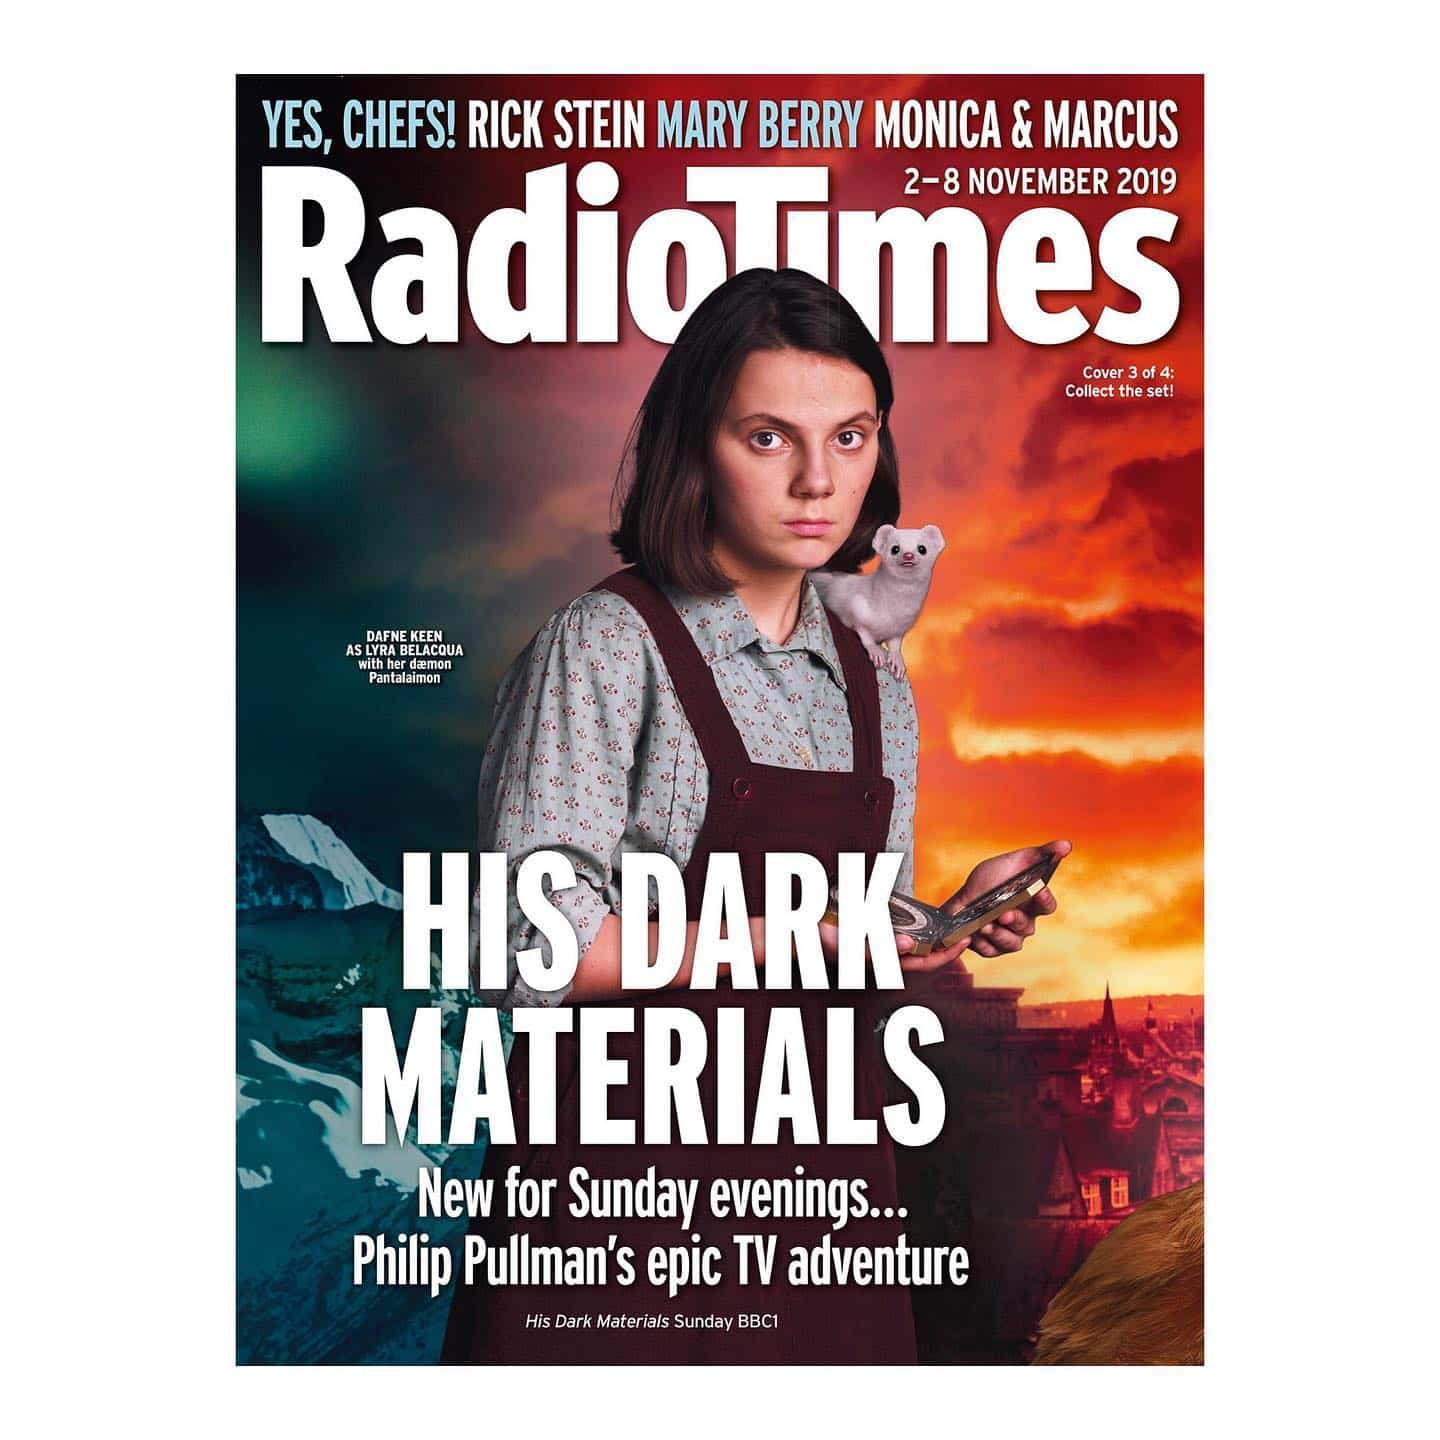 @dafnekeen on the cover of @radiotimes ahead of the premiere of @darkmaterialsofficial this Sunday on BBC One
.
.
.